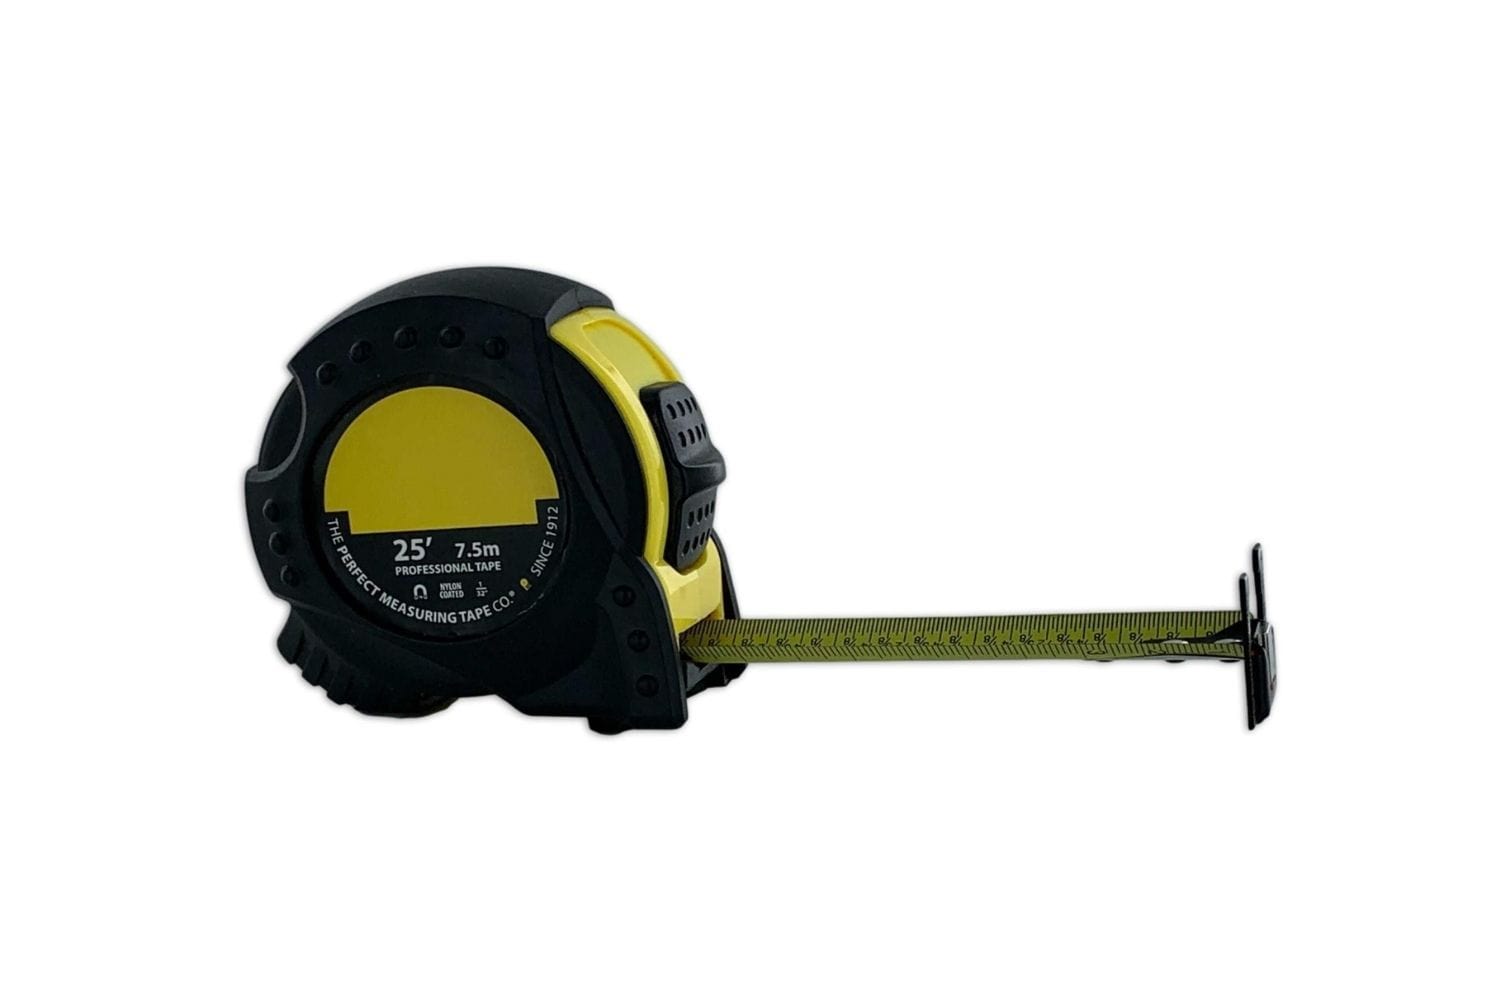 25ft Standard Powertape Retractable Measuring Tape with Black Rubberized  Cover